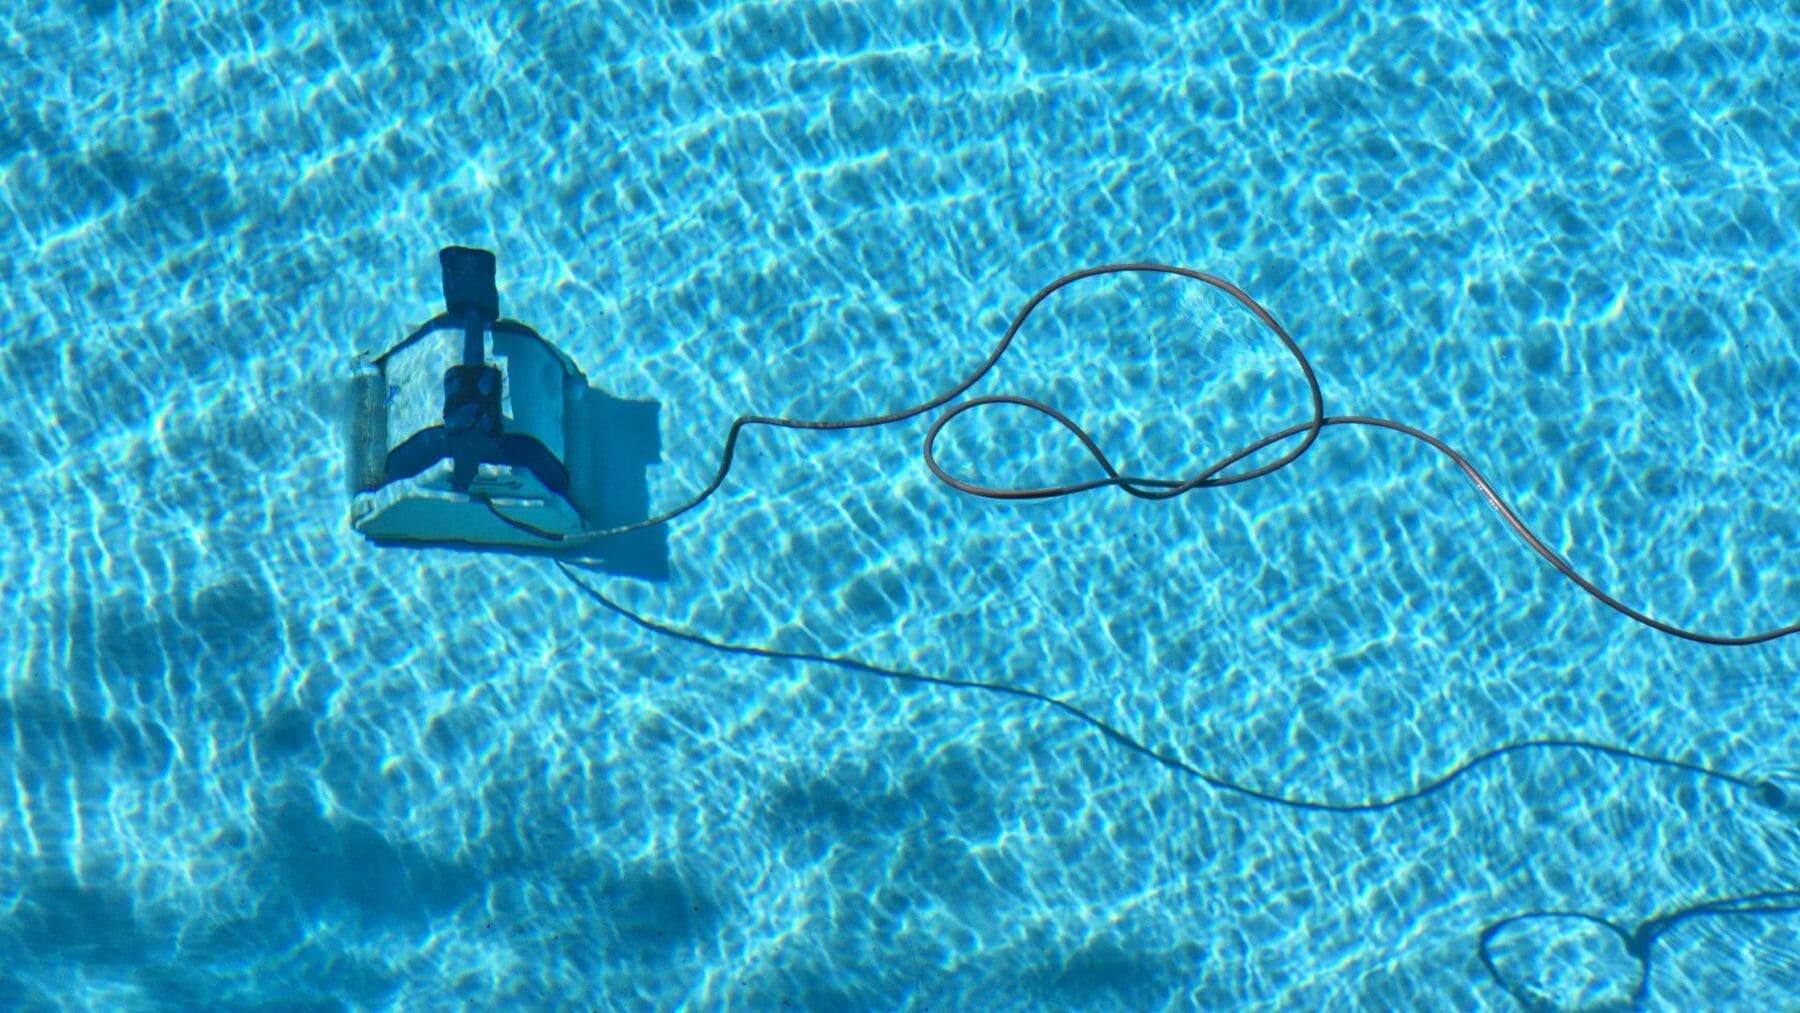 A pool vacuum at the bottom of a pool cleaning.